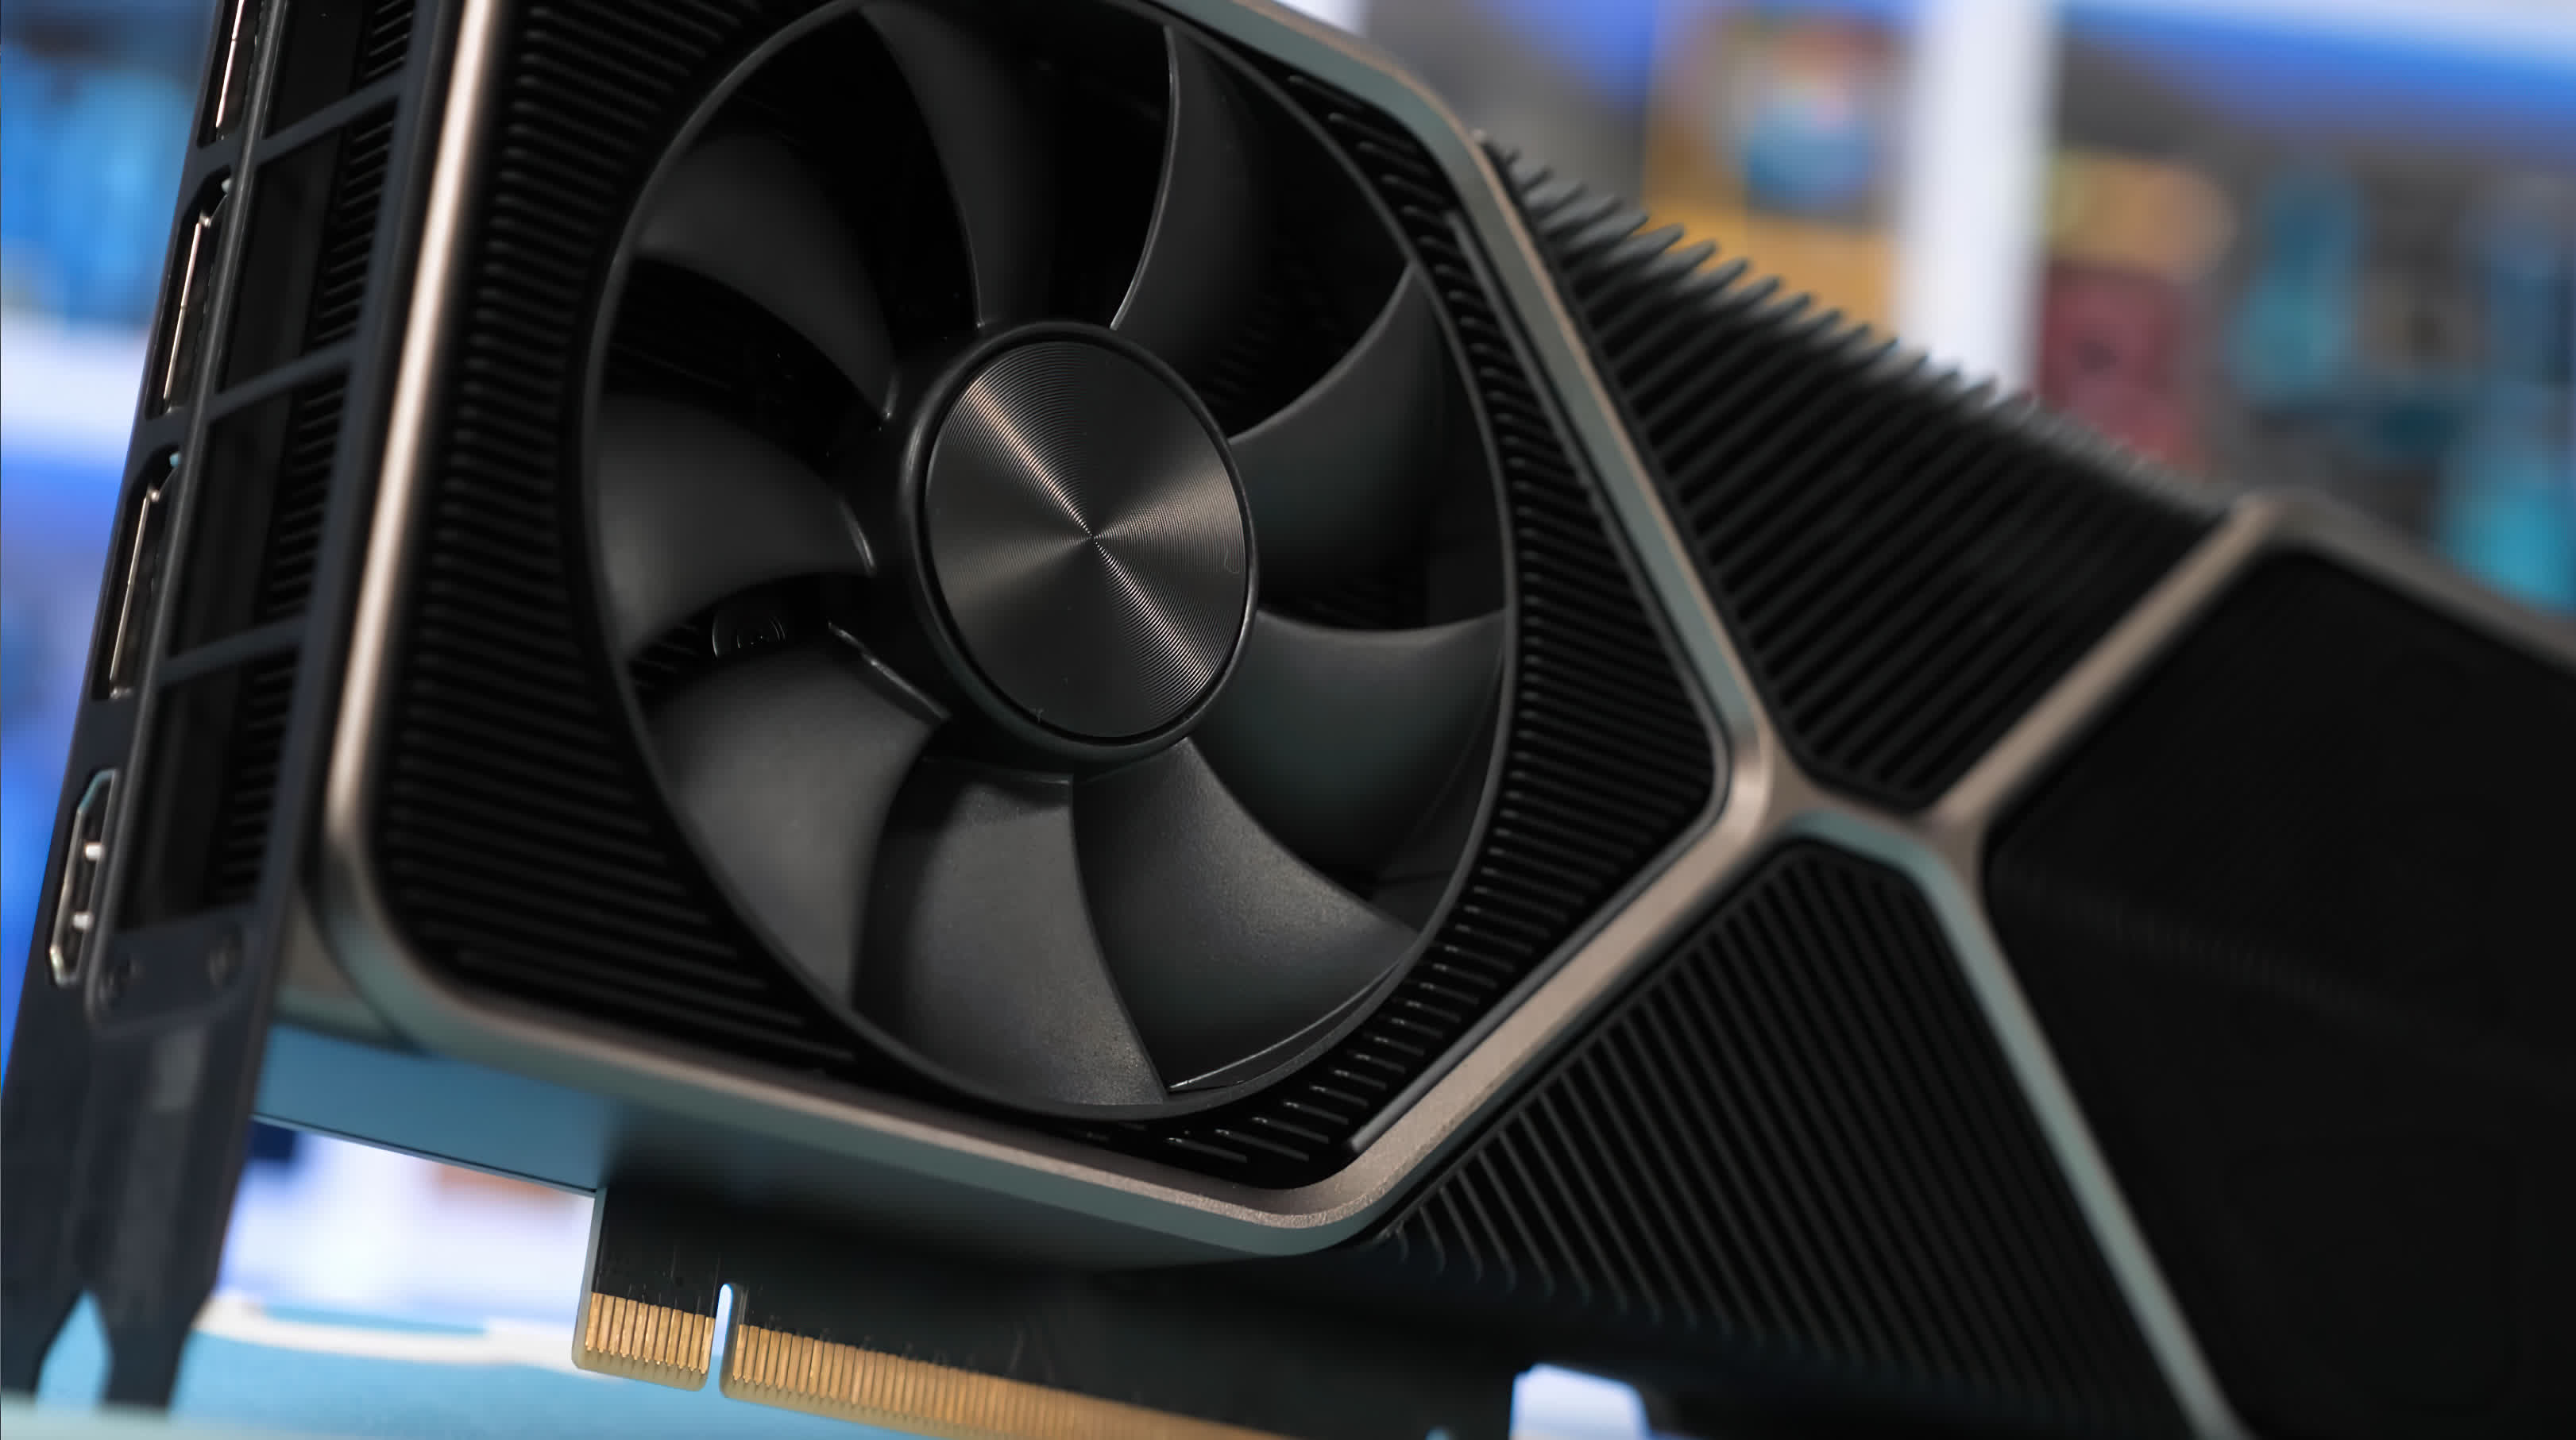 GeForce RTX 3080 Ti: listings reach $2,259, rumored new release date